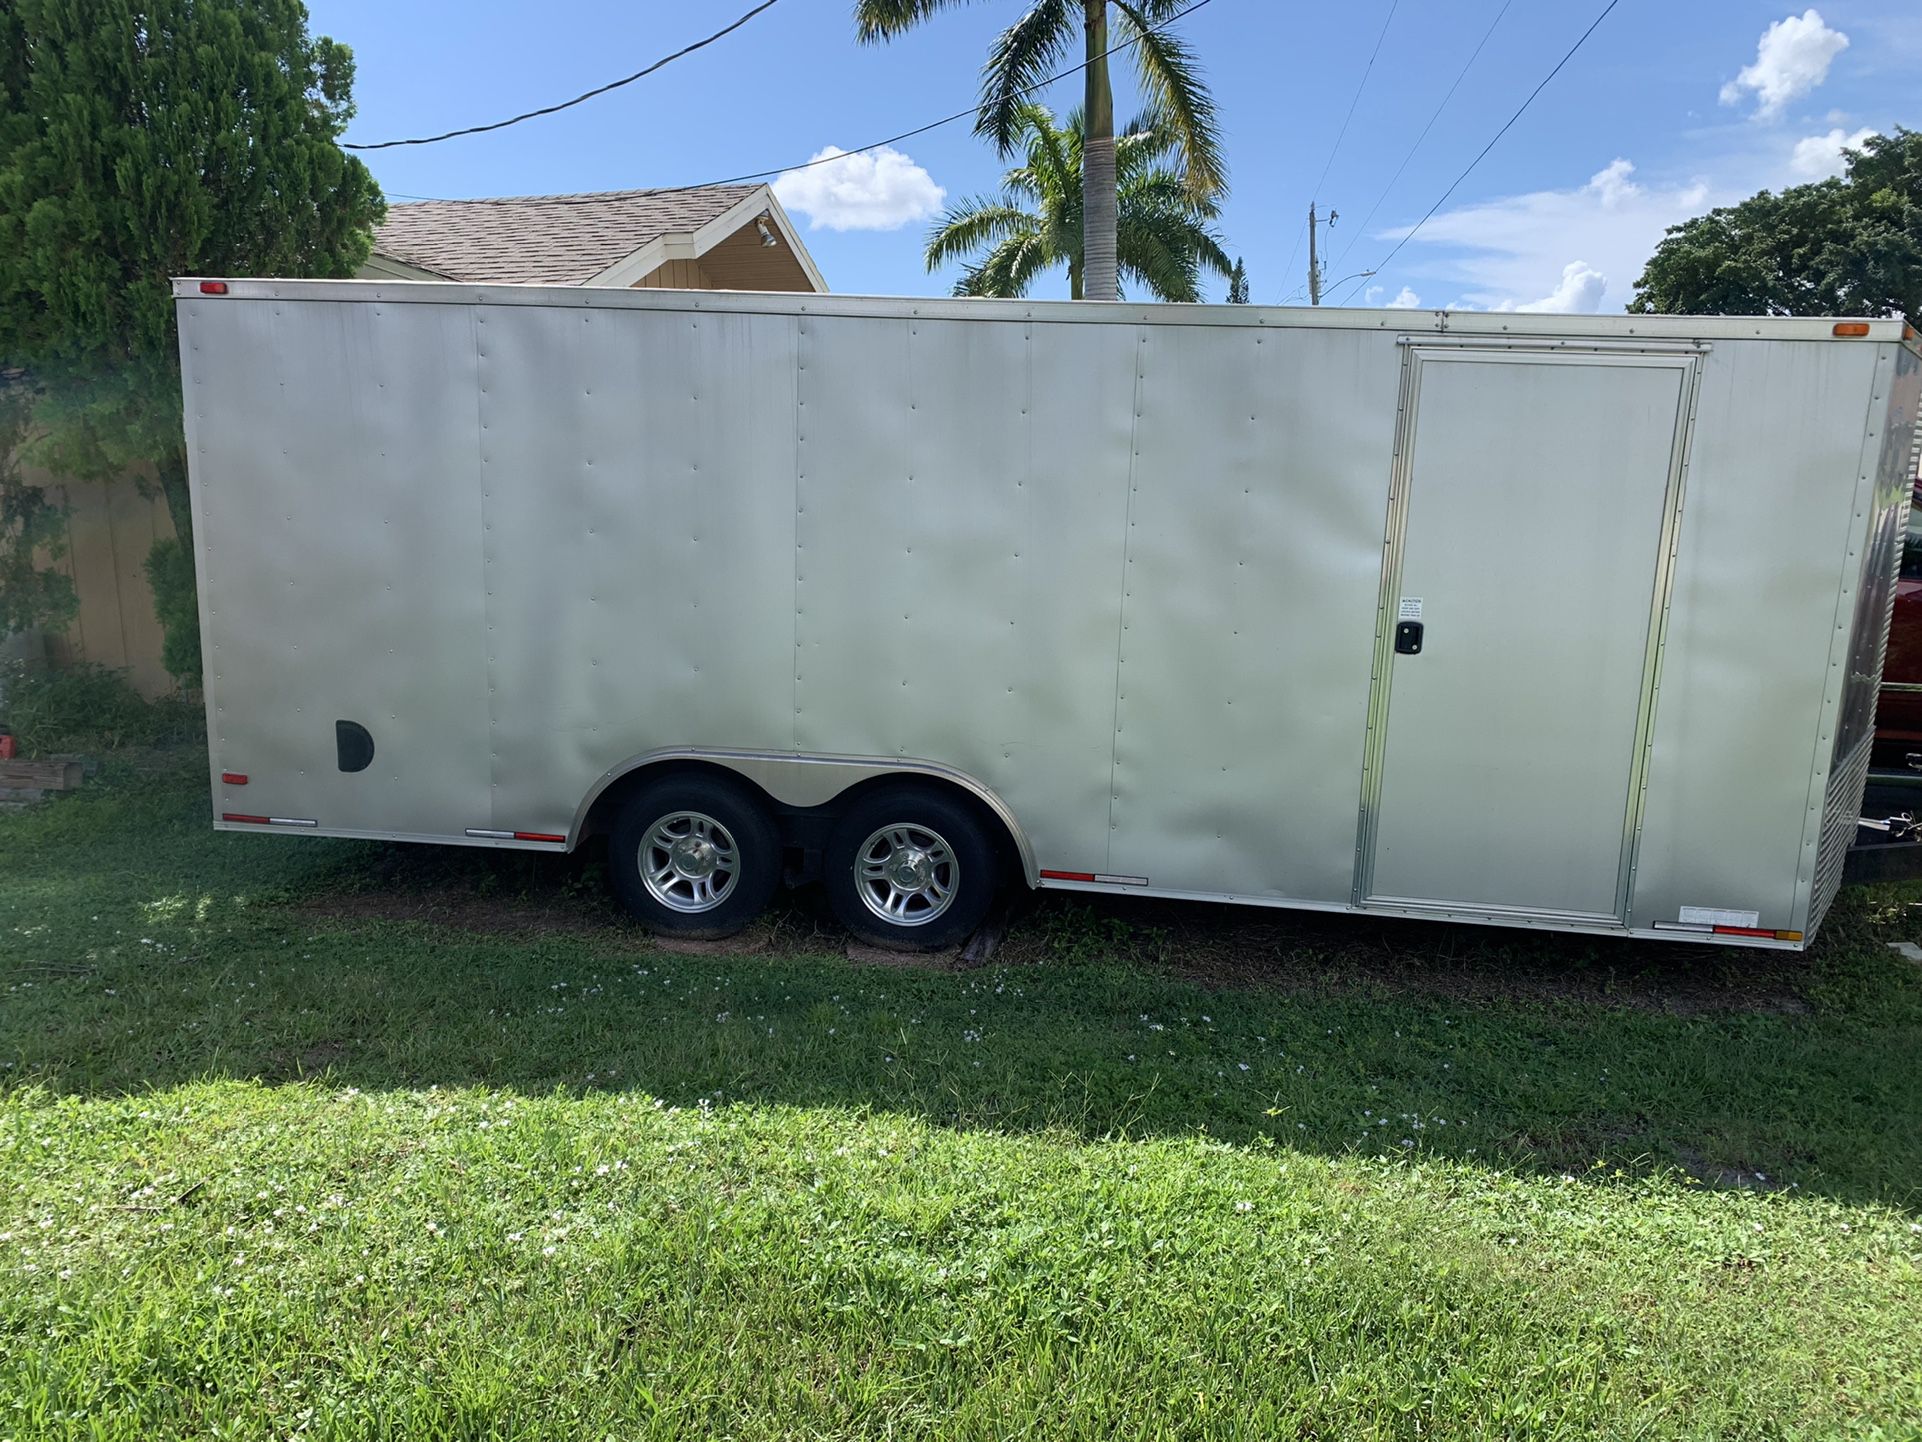 Enclosed trailer great for hauling cars motorcycles or precious cargo 8000 or best offer comes with upgraded tires and rims as well as two otheo other